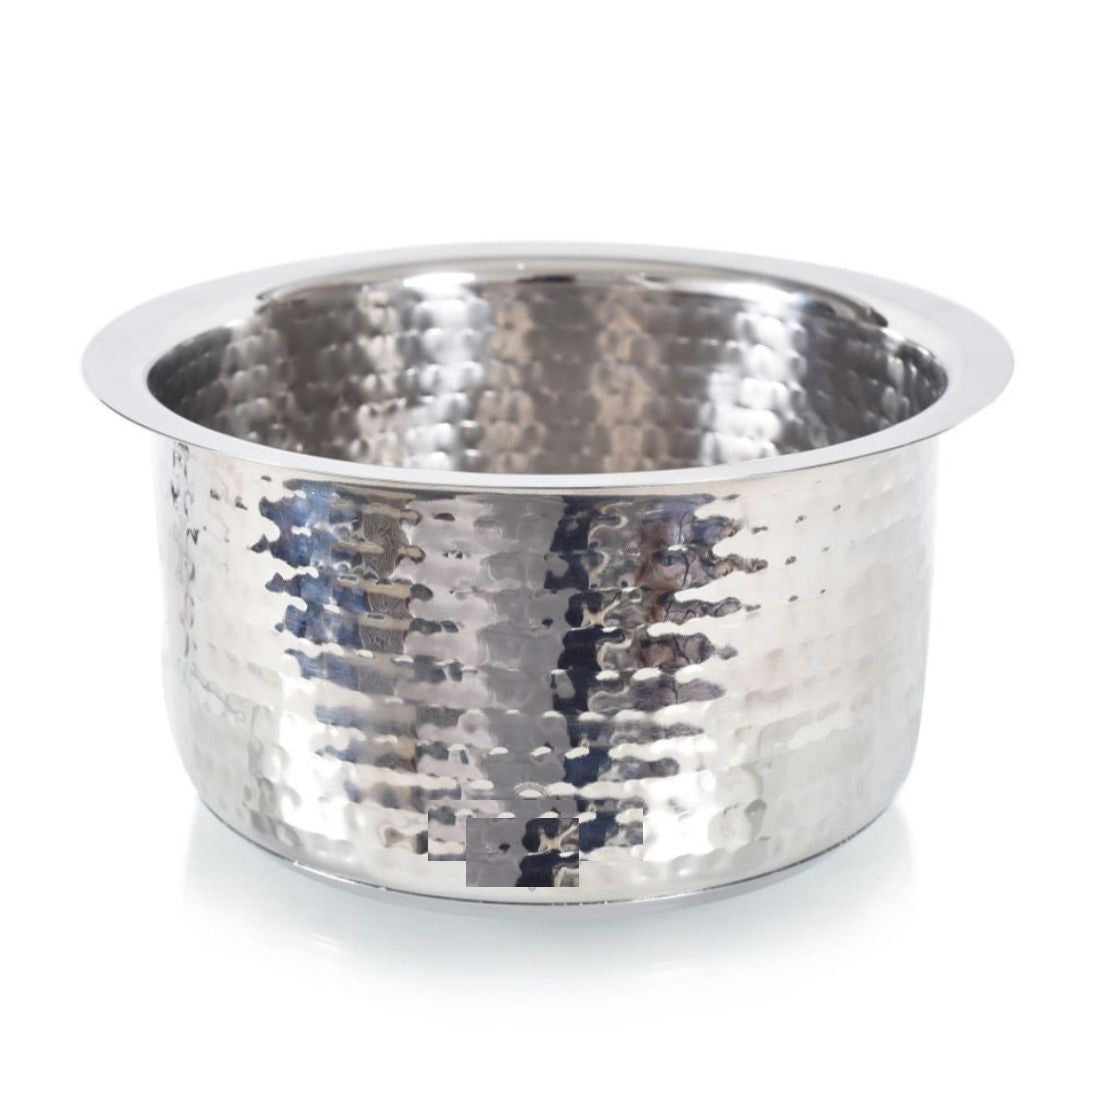 Aluminium Indian Hammered Deep Pot 6.5L with Lid No18 Round Heavy Duty 6257